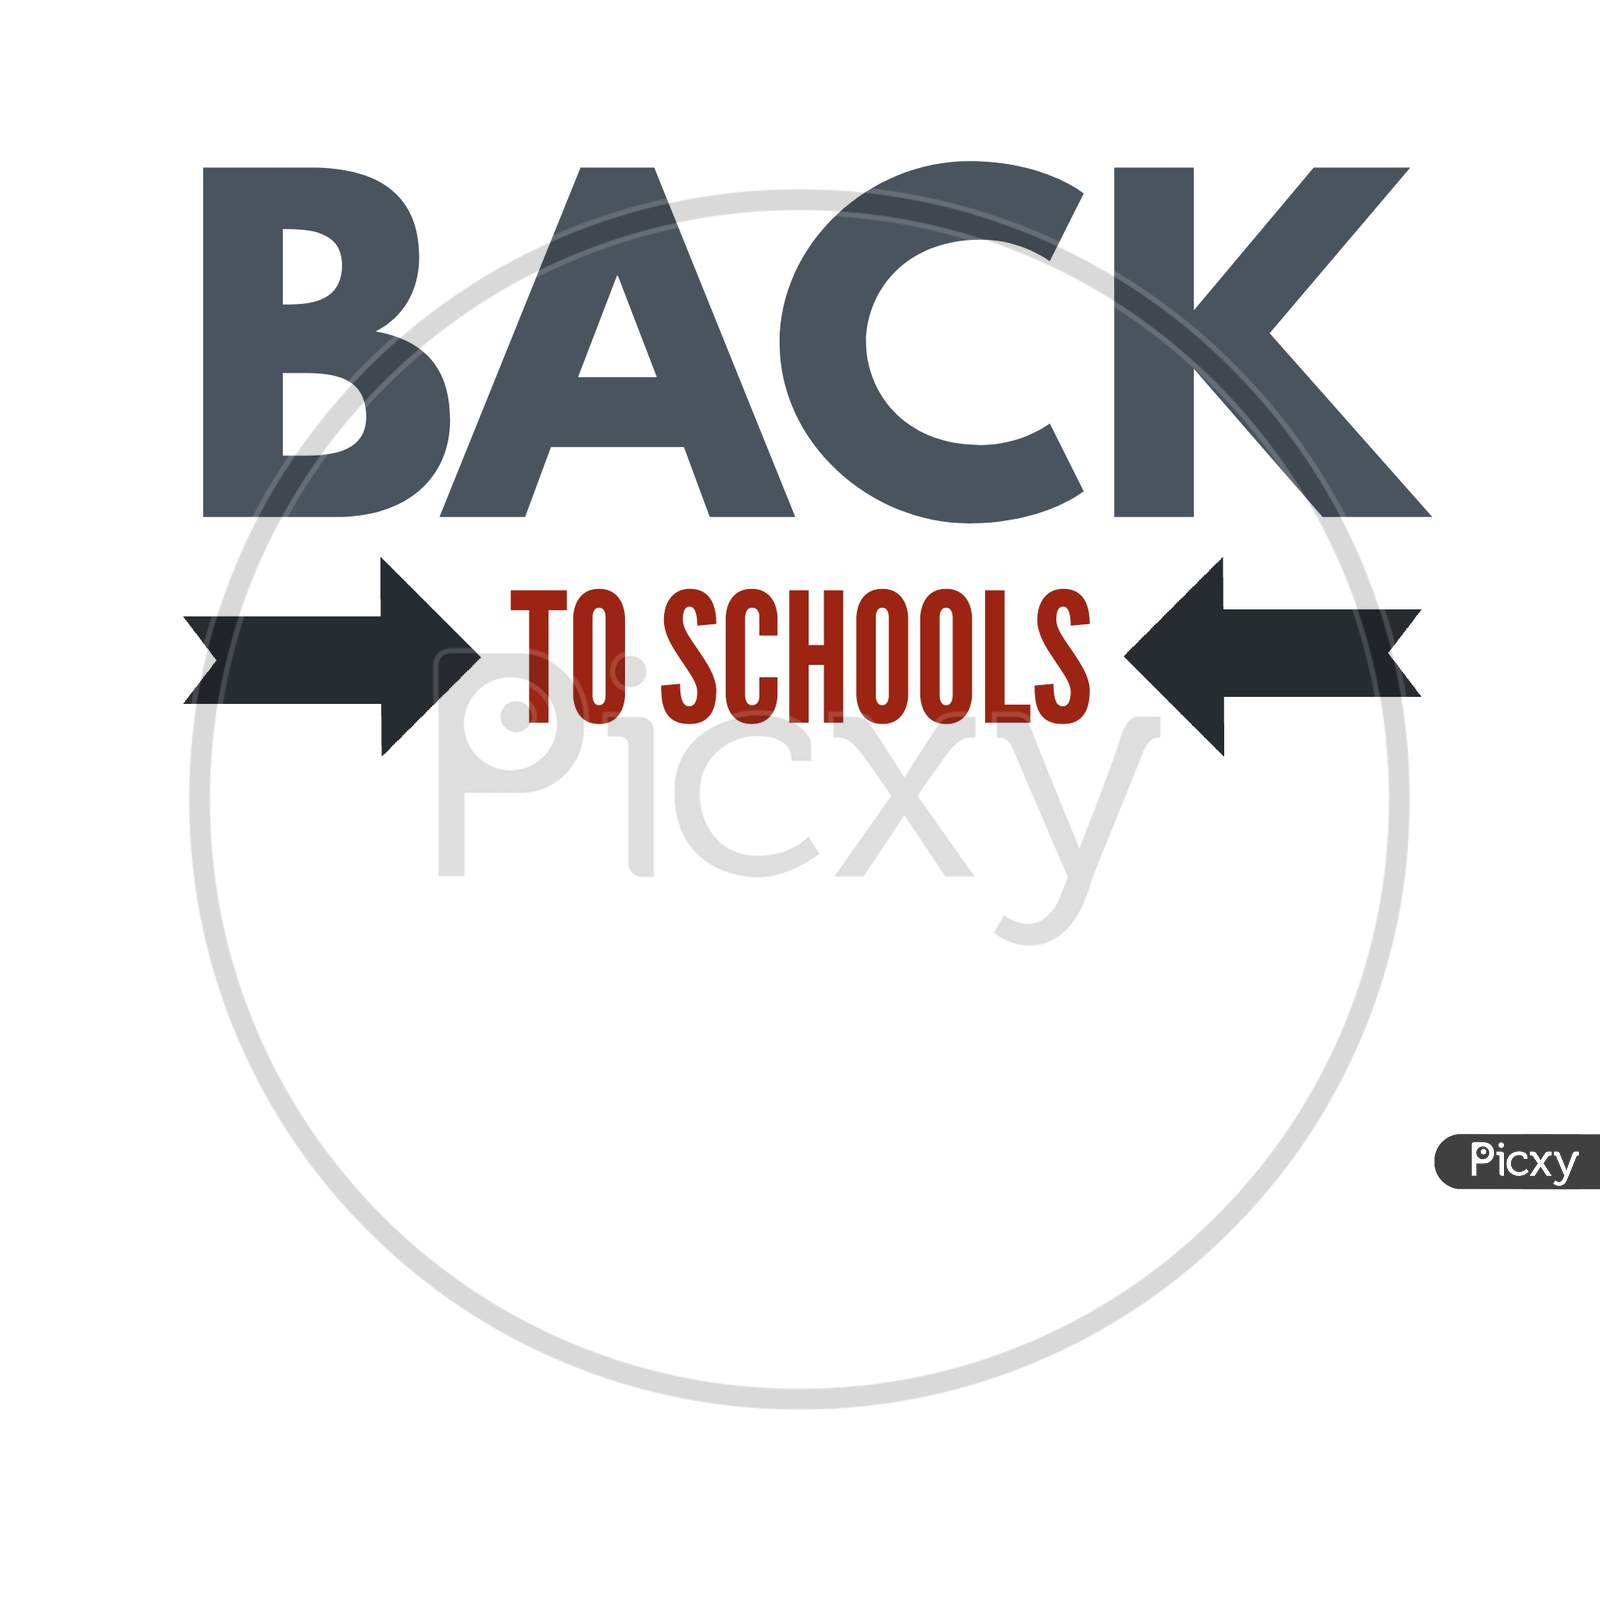 Image With A Text "Back To School" On White Background.